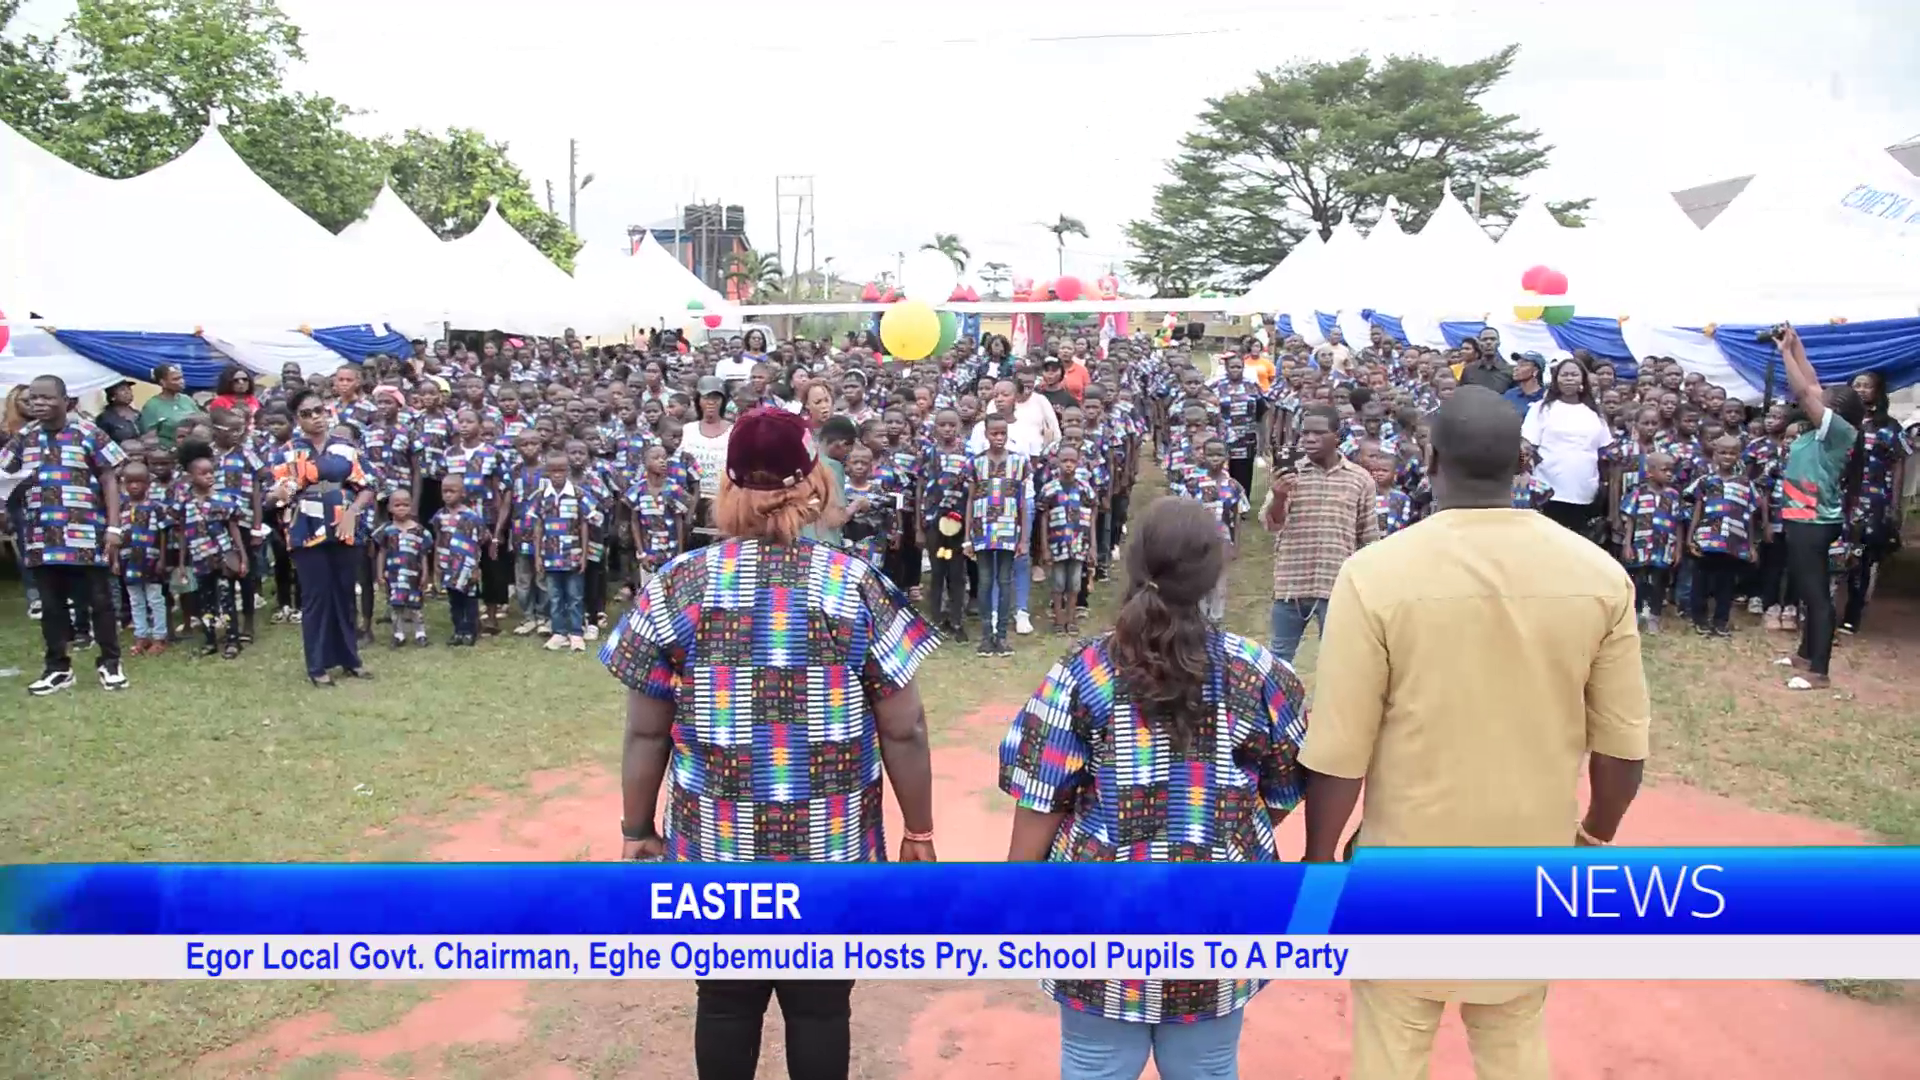 Egor Local Govt. Chairman, Eghe Ogbemudia Hosts Pry. School Pupils To An Easter Party